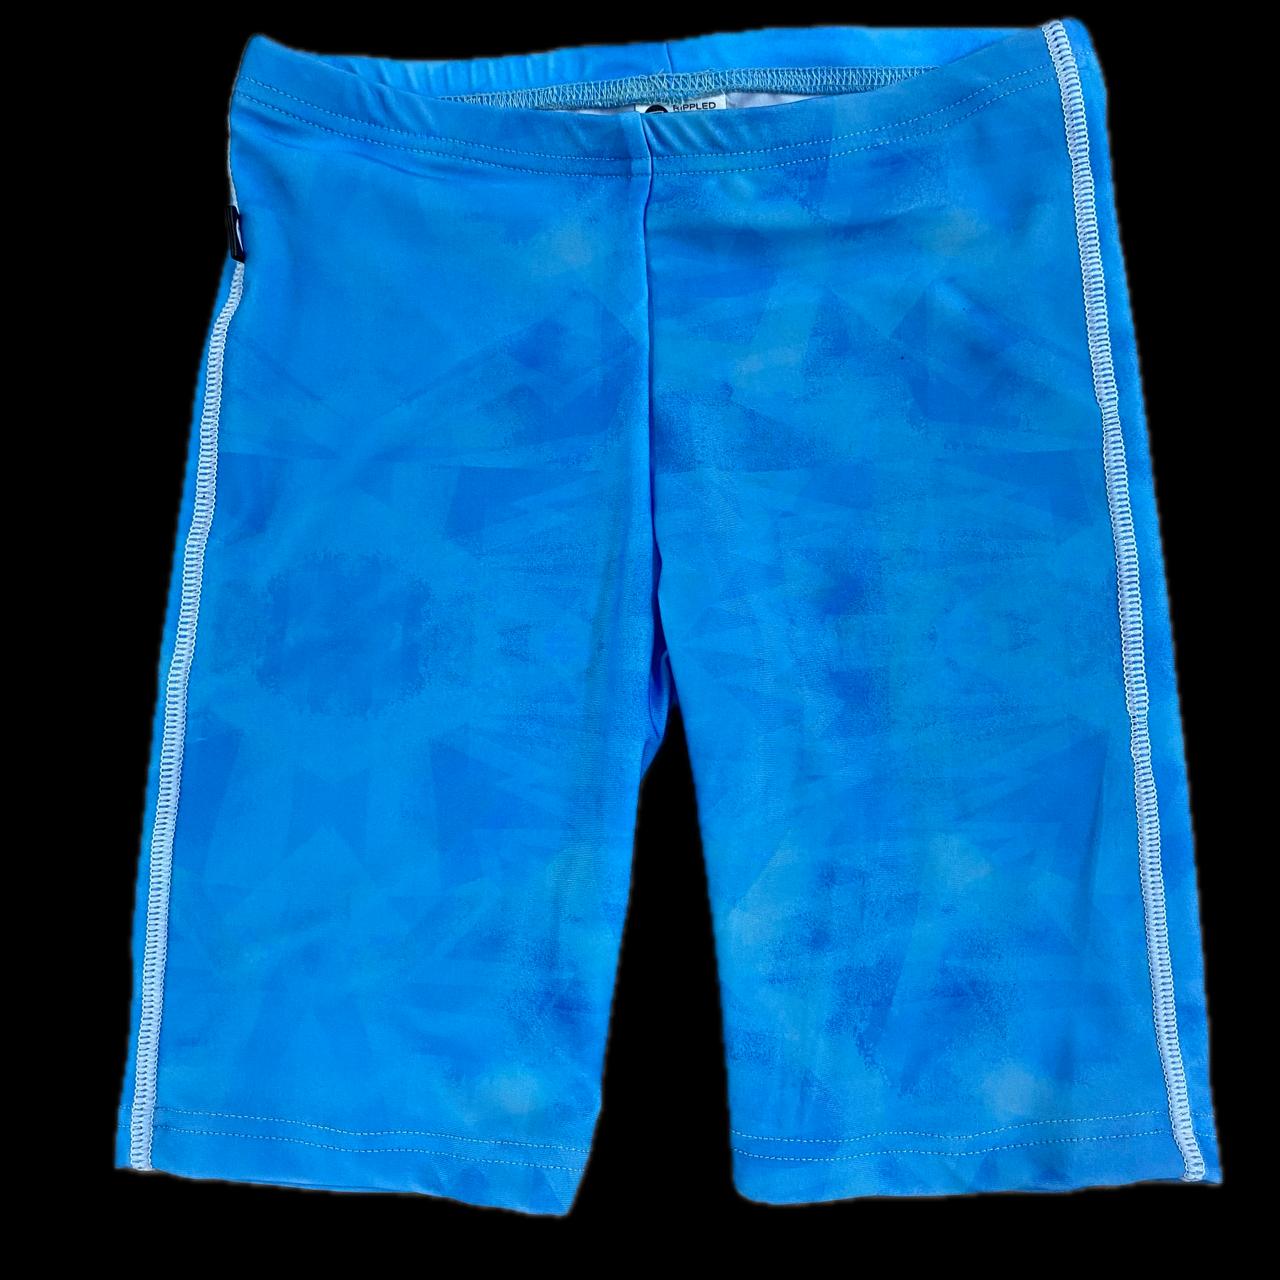 Rippled Effect Boys Jammers - Blue Prism